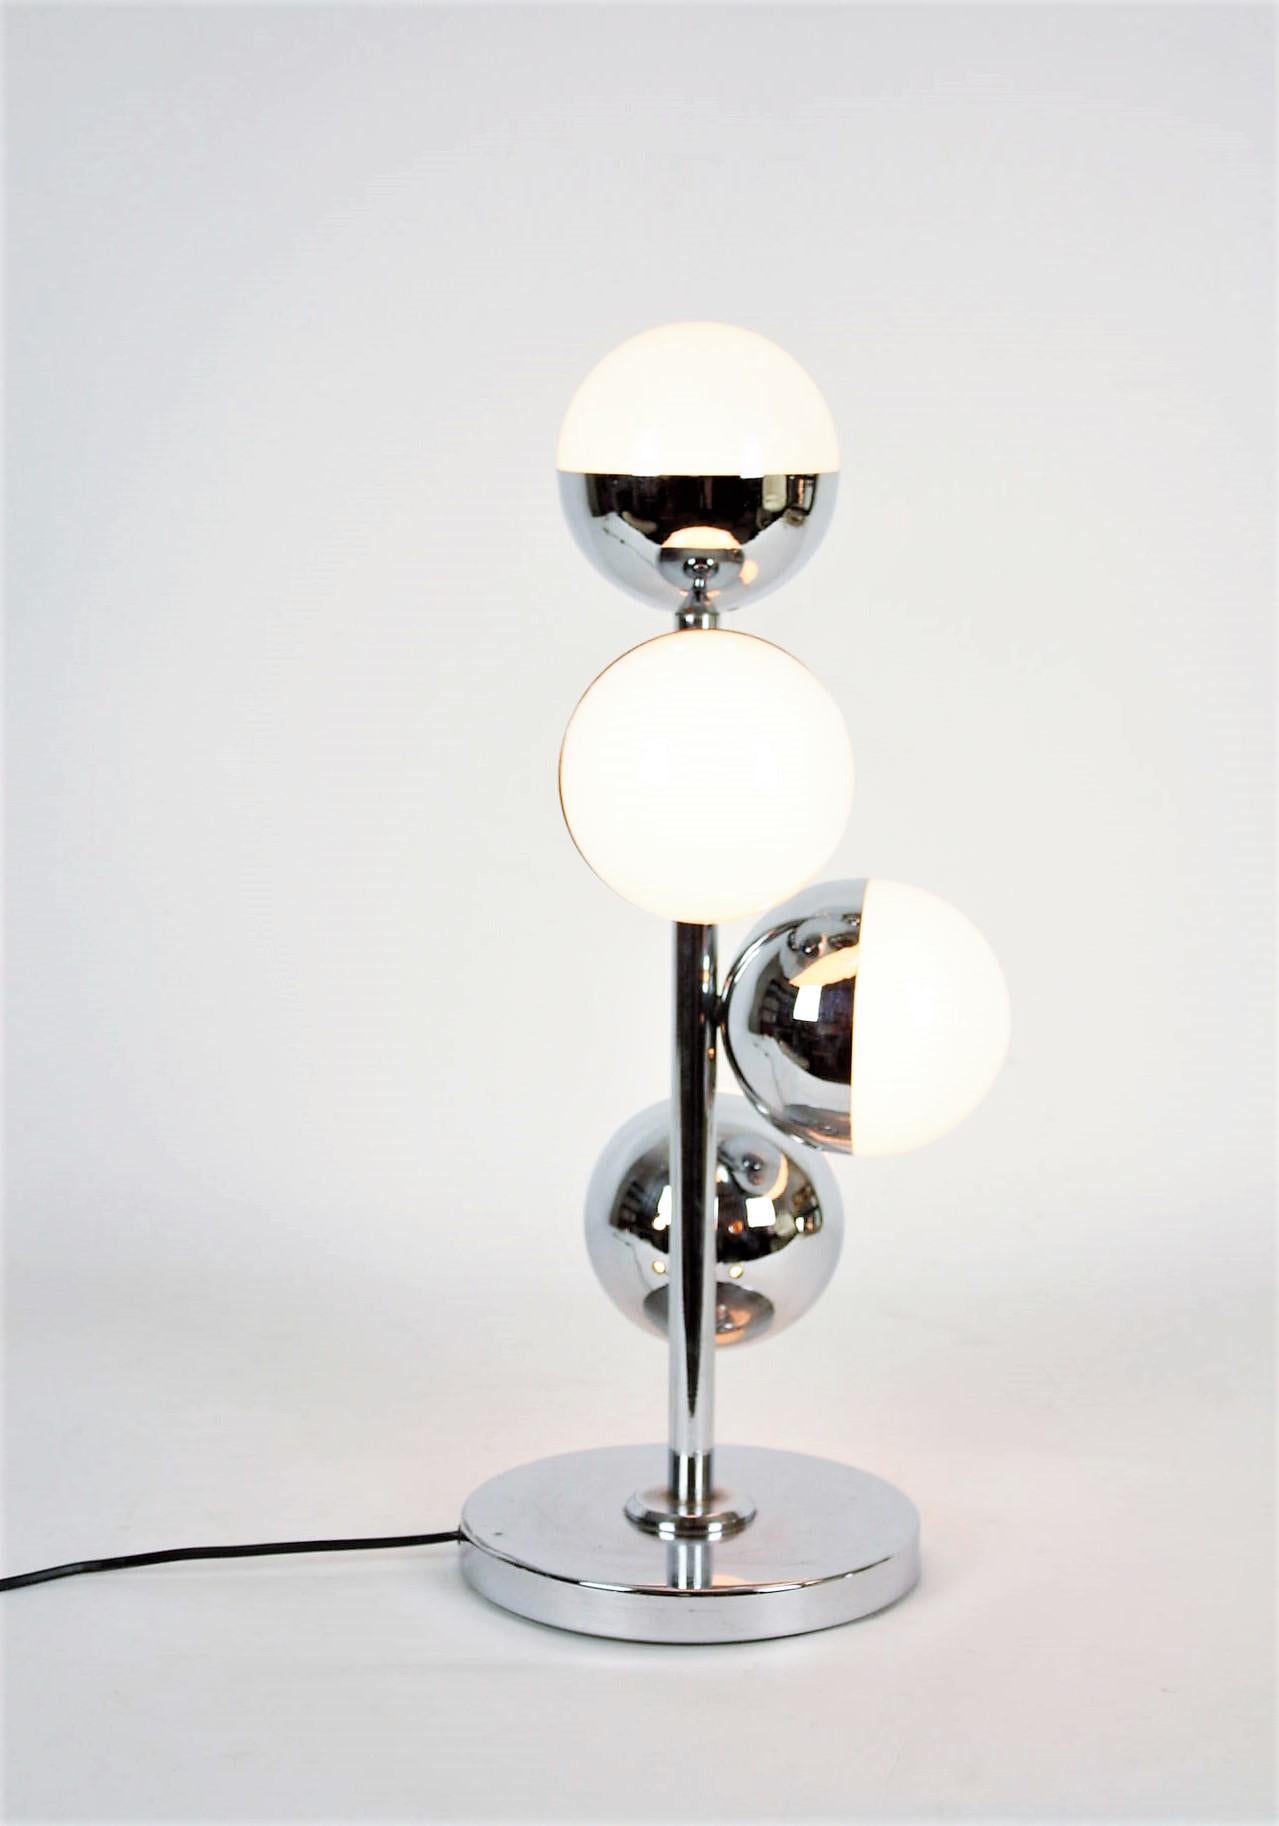 A chromed steel and opaline glass table lamp in the style of Stilnovo, Italy, 1960s.
It has a central chromed steel column holding 4 glass globe light in different heights.
Beautifully designed in the manner of Stilnovo.
Measures: 55 cm height x